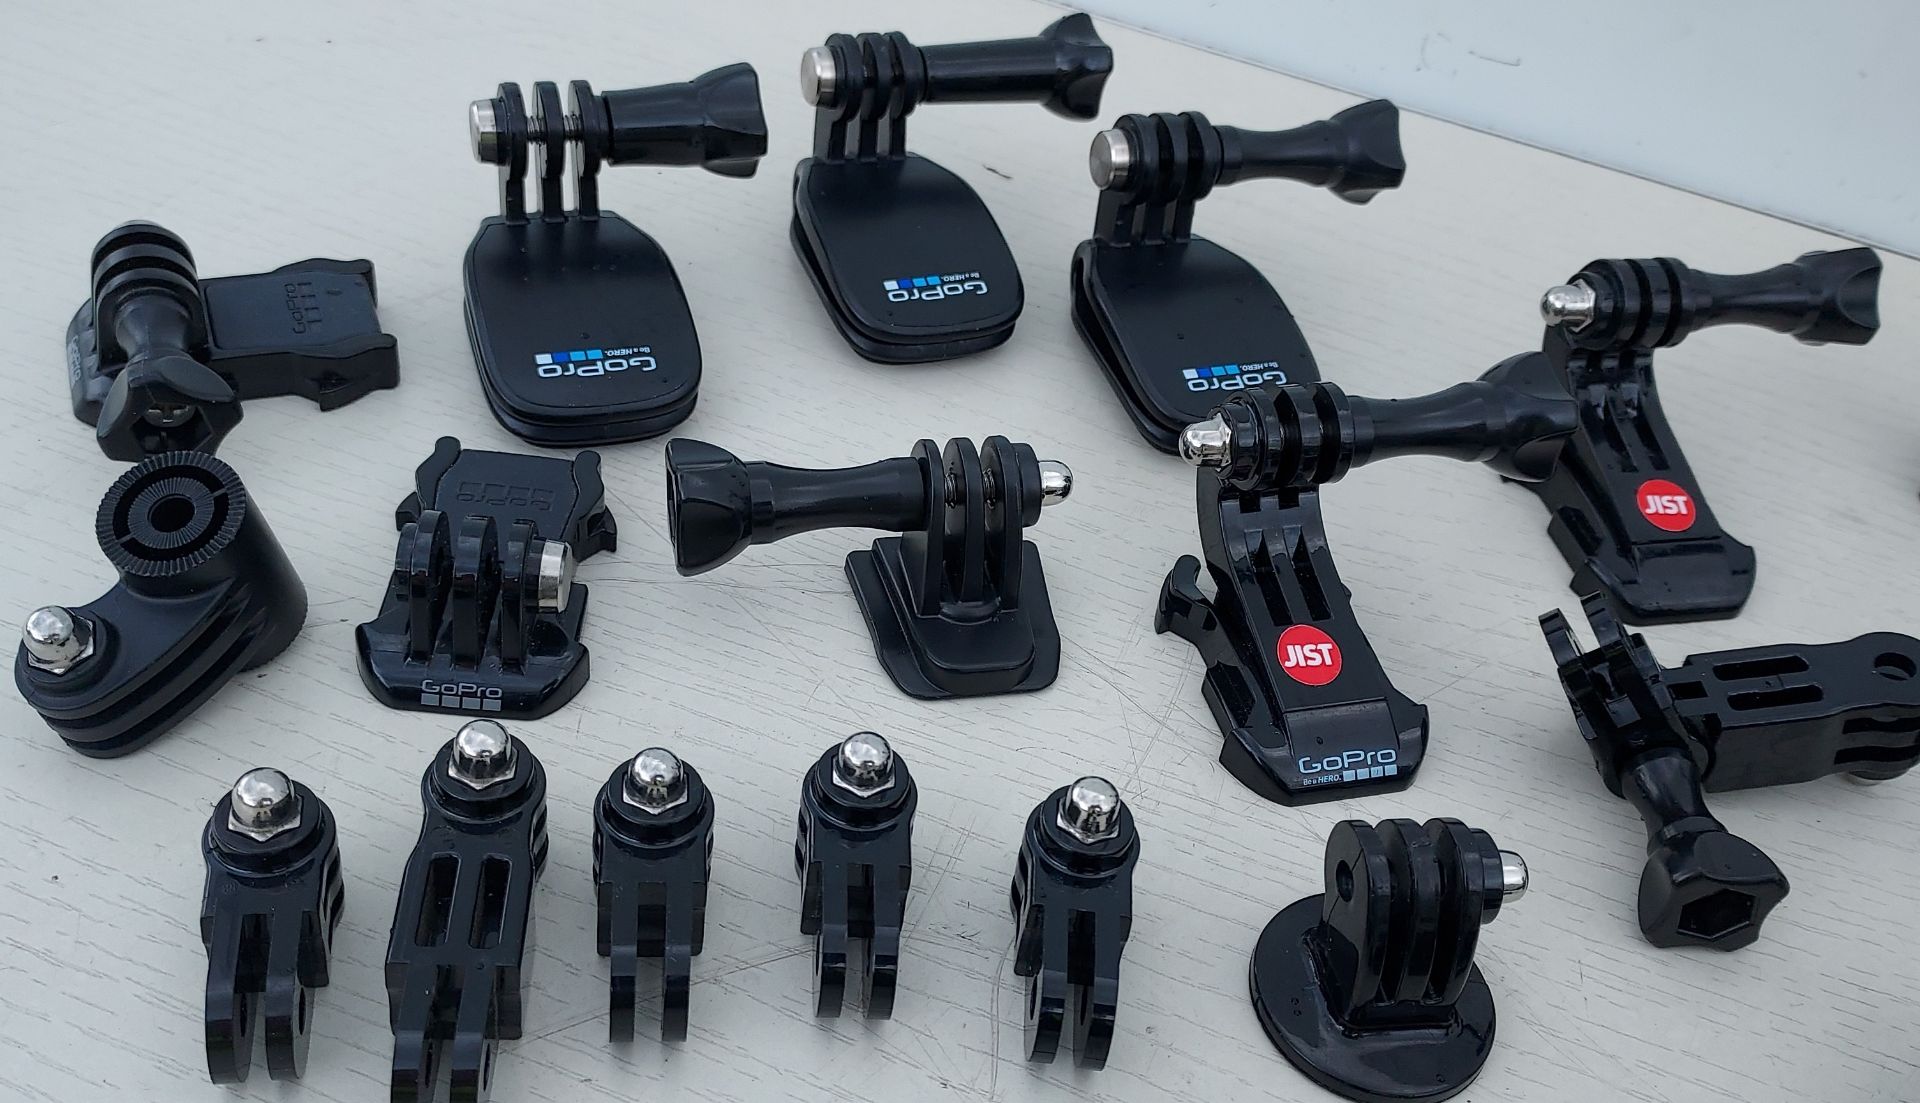 MISC LOT OF 35+ GO PRO MOUNTING ATTACHMENTS FOR CAMERAS & CAMERA MOUNTING PLATES - Image 3 of 4